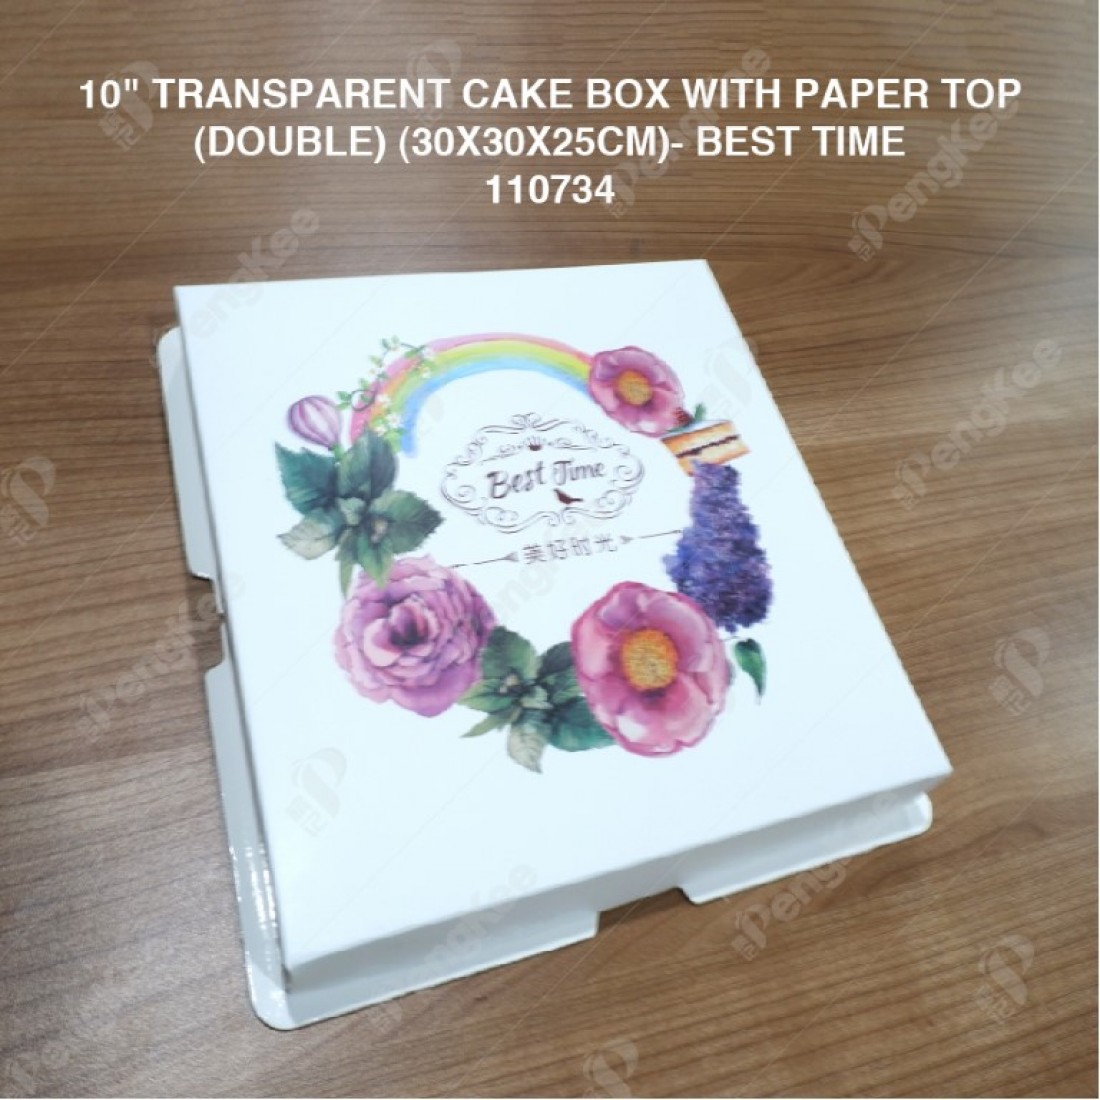 10" TRANSPARENT CAKE BOX WITH PAPER TOP(DOUBLE) (30*30*25CM)- BEST TIME